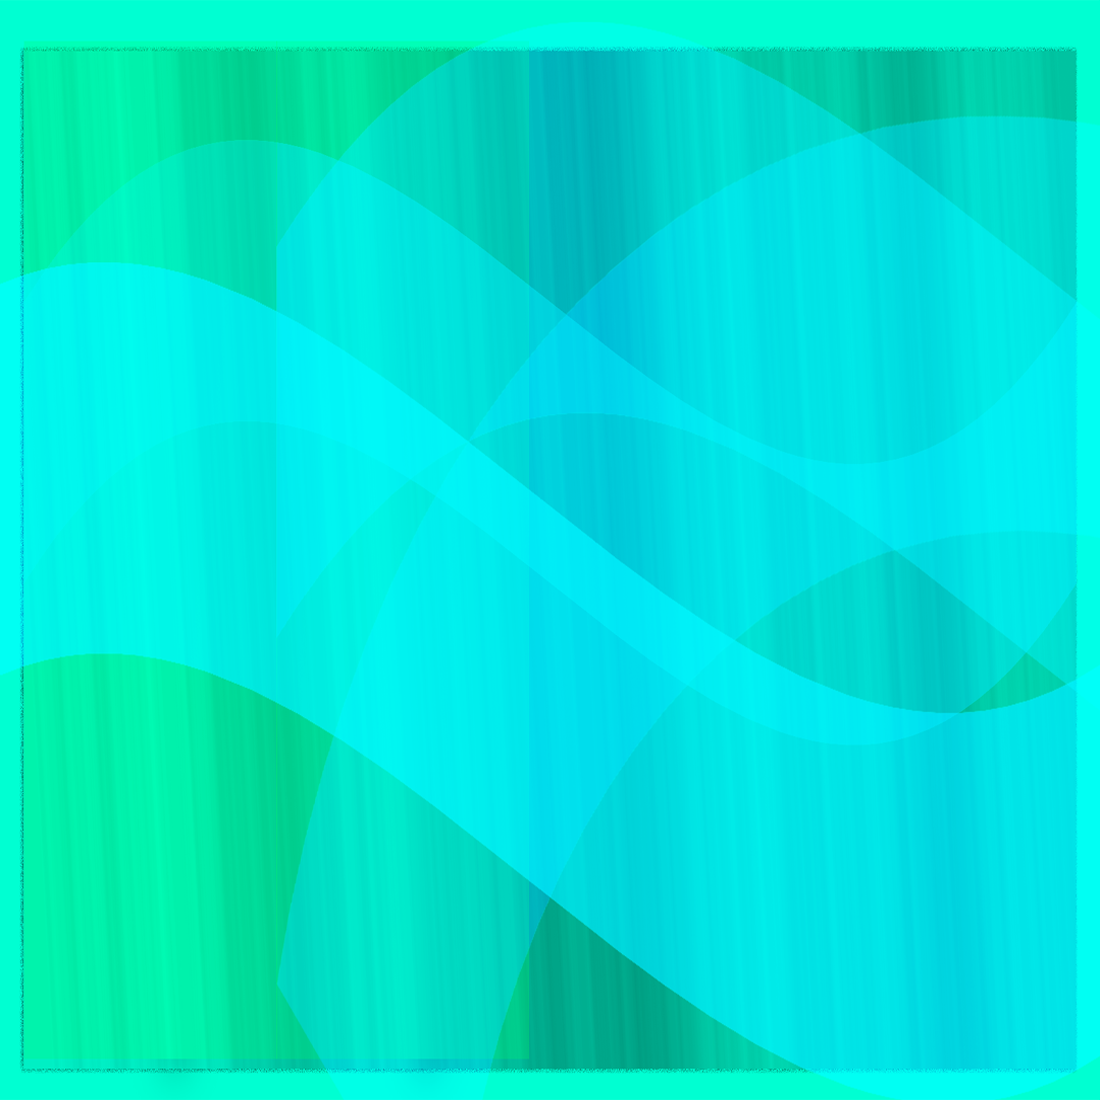 Blue and green background with wavy lines.